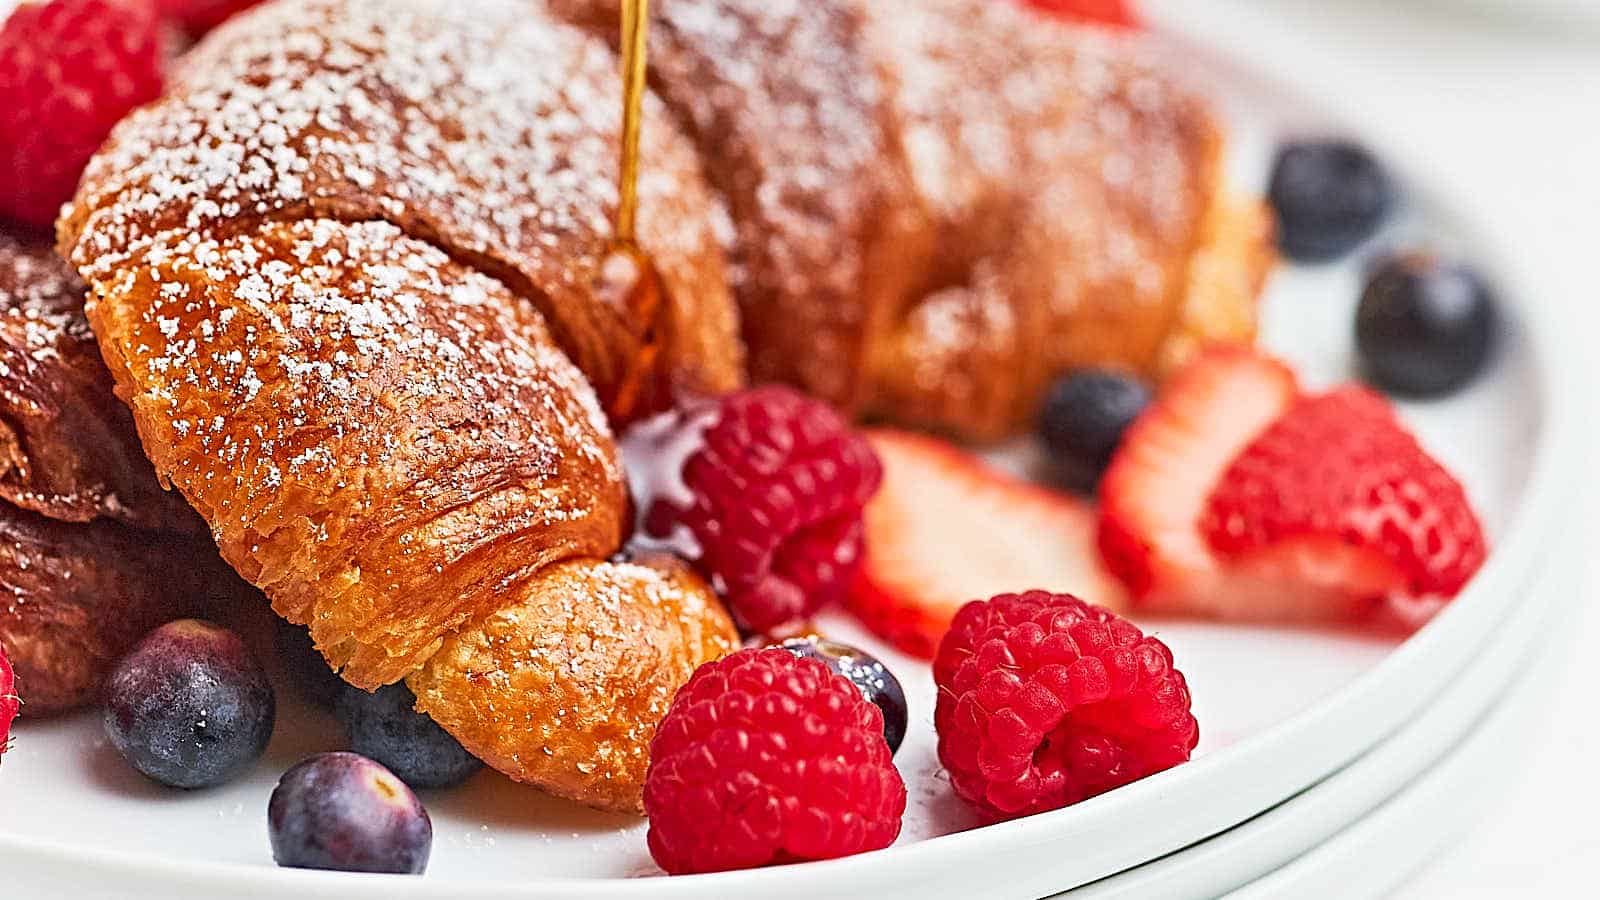 A plate of croissants with berries and syrup.